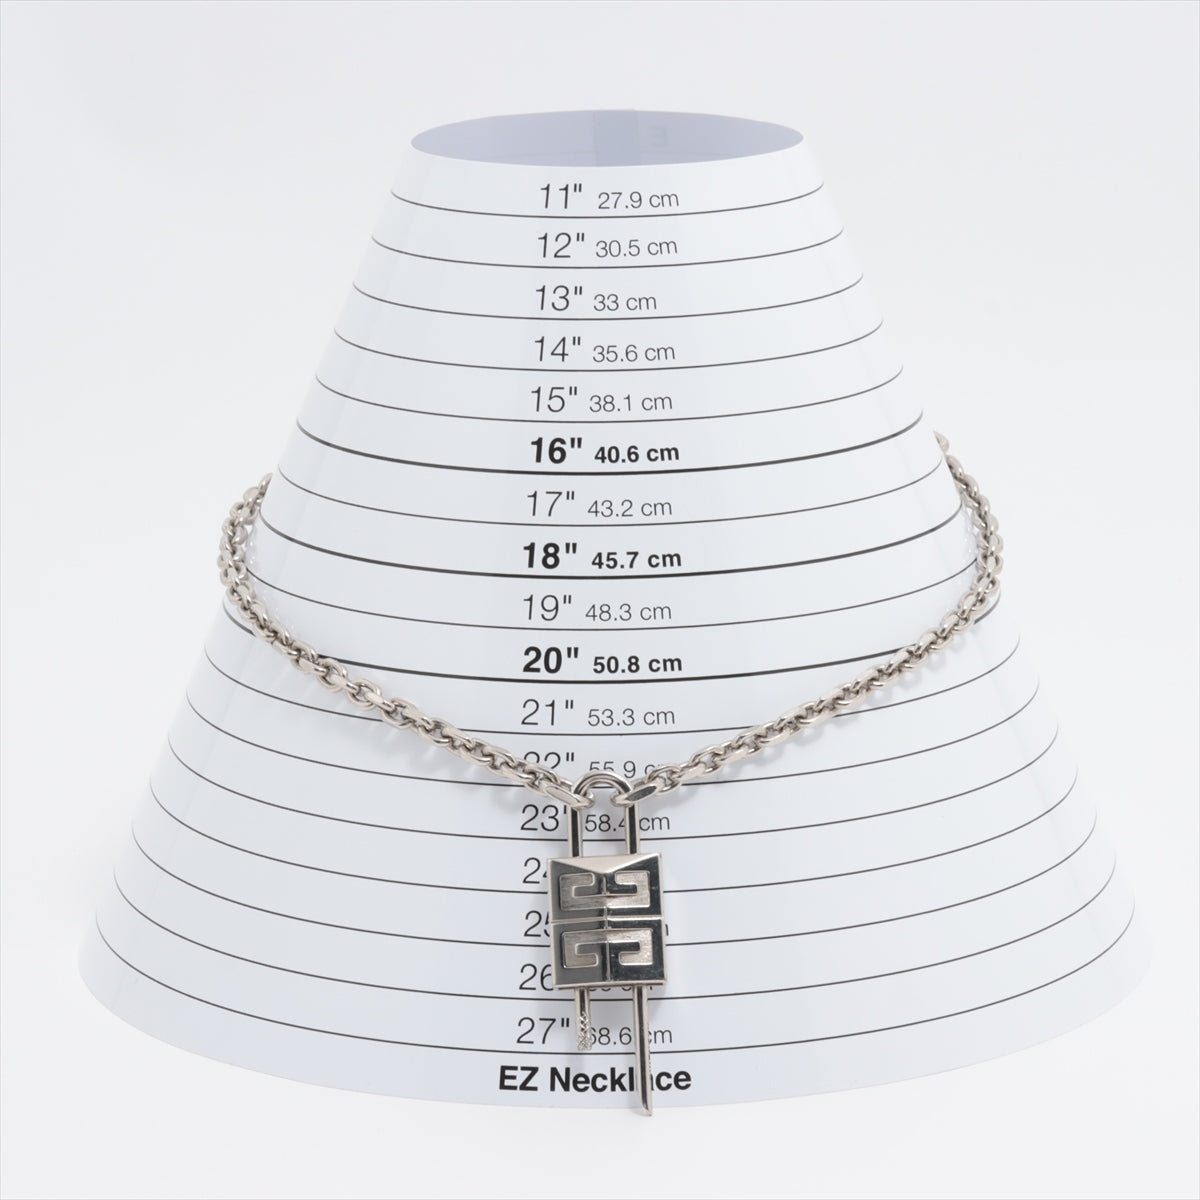 Givenchy Padlock Chain Necklace GP Silver Scratched Wears Losing luster